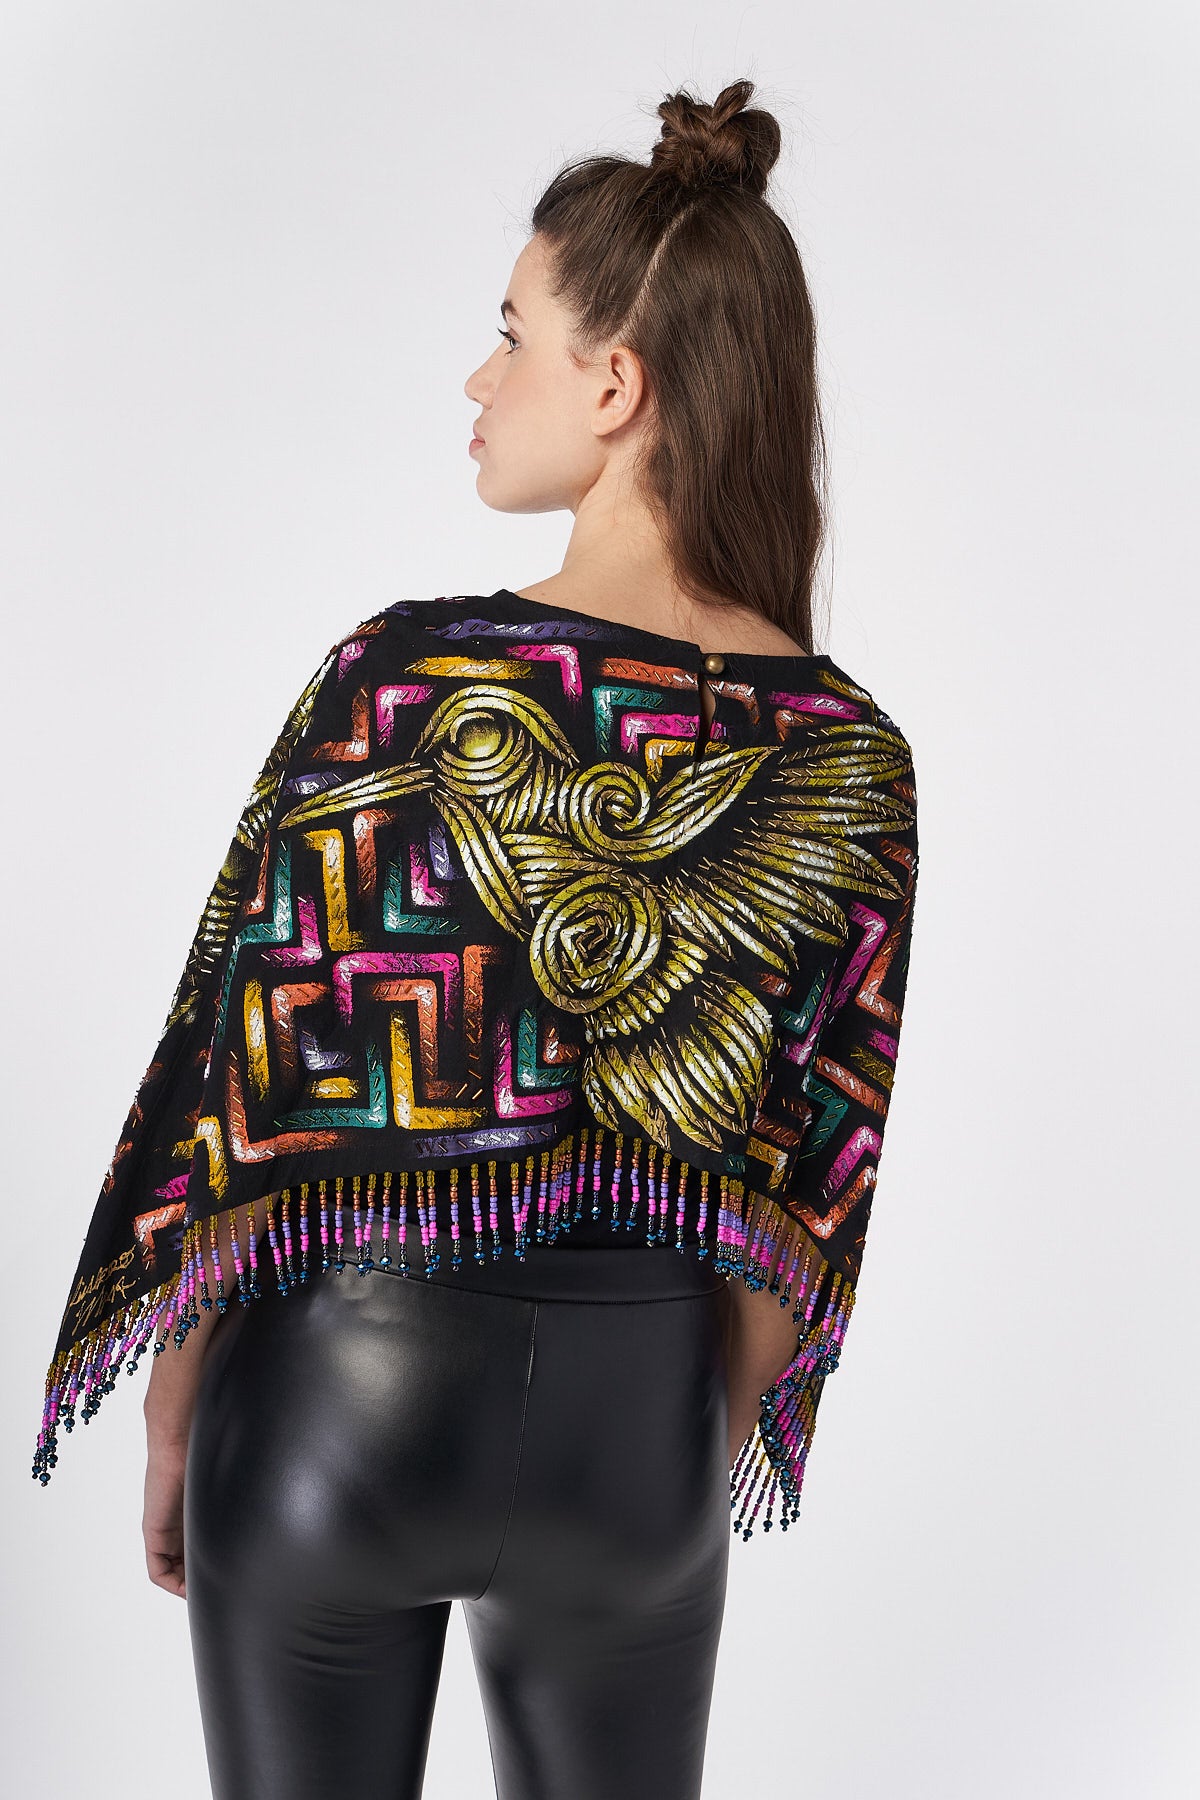 SHORT HAND-PAINTED AND HAND-EMBROIDERED CAPE WITH BEADED FRINGE